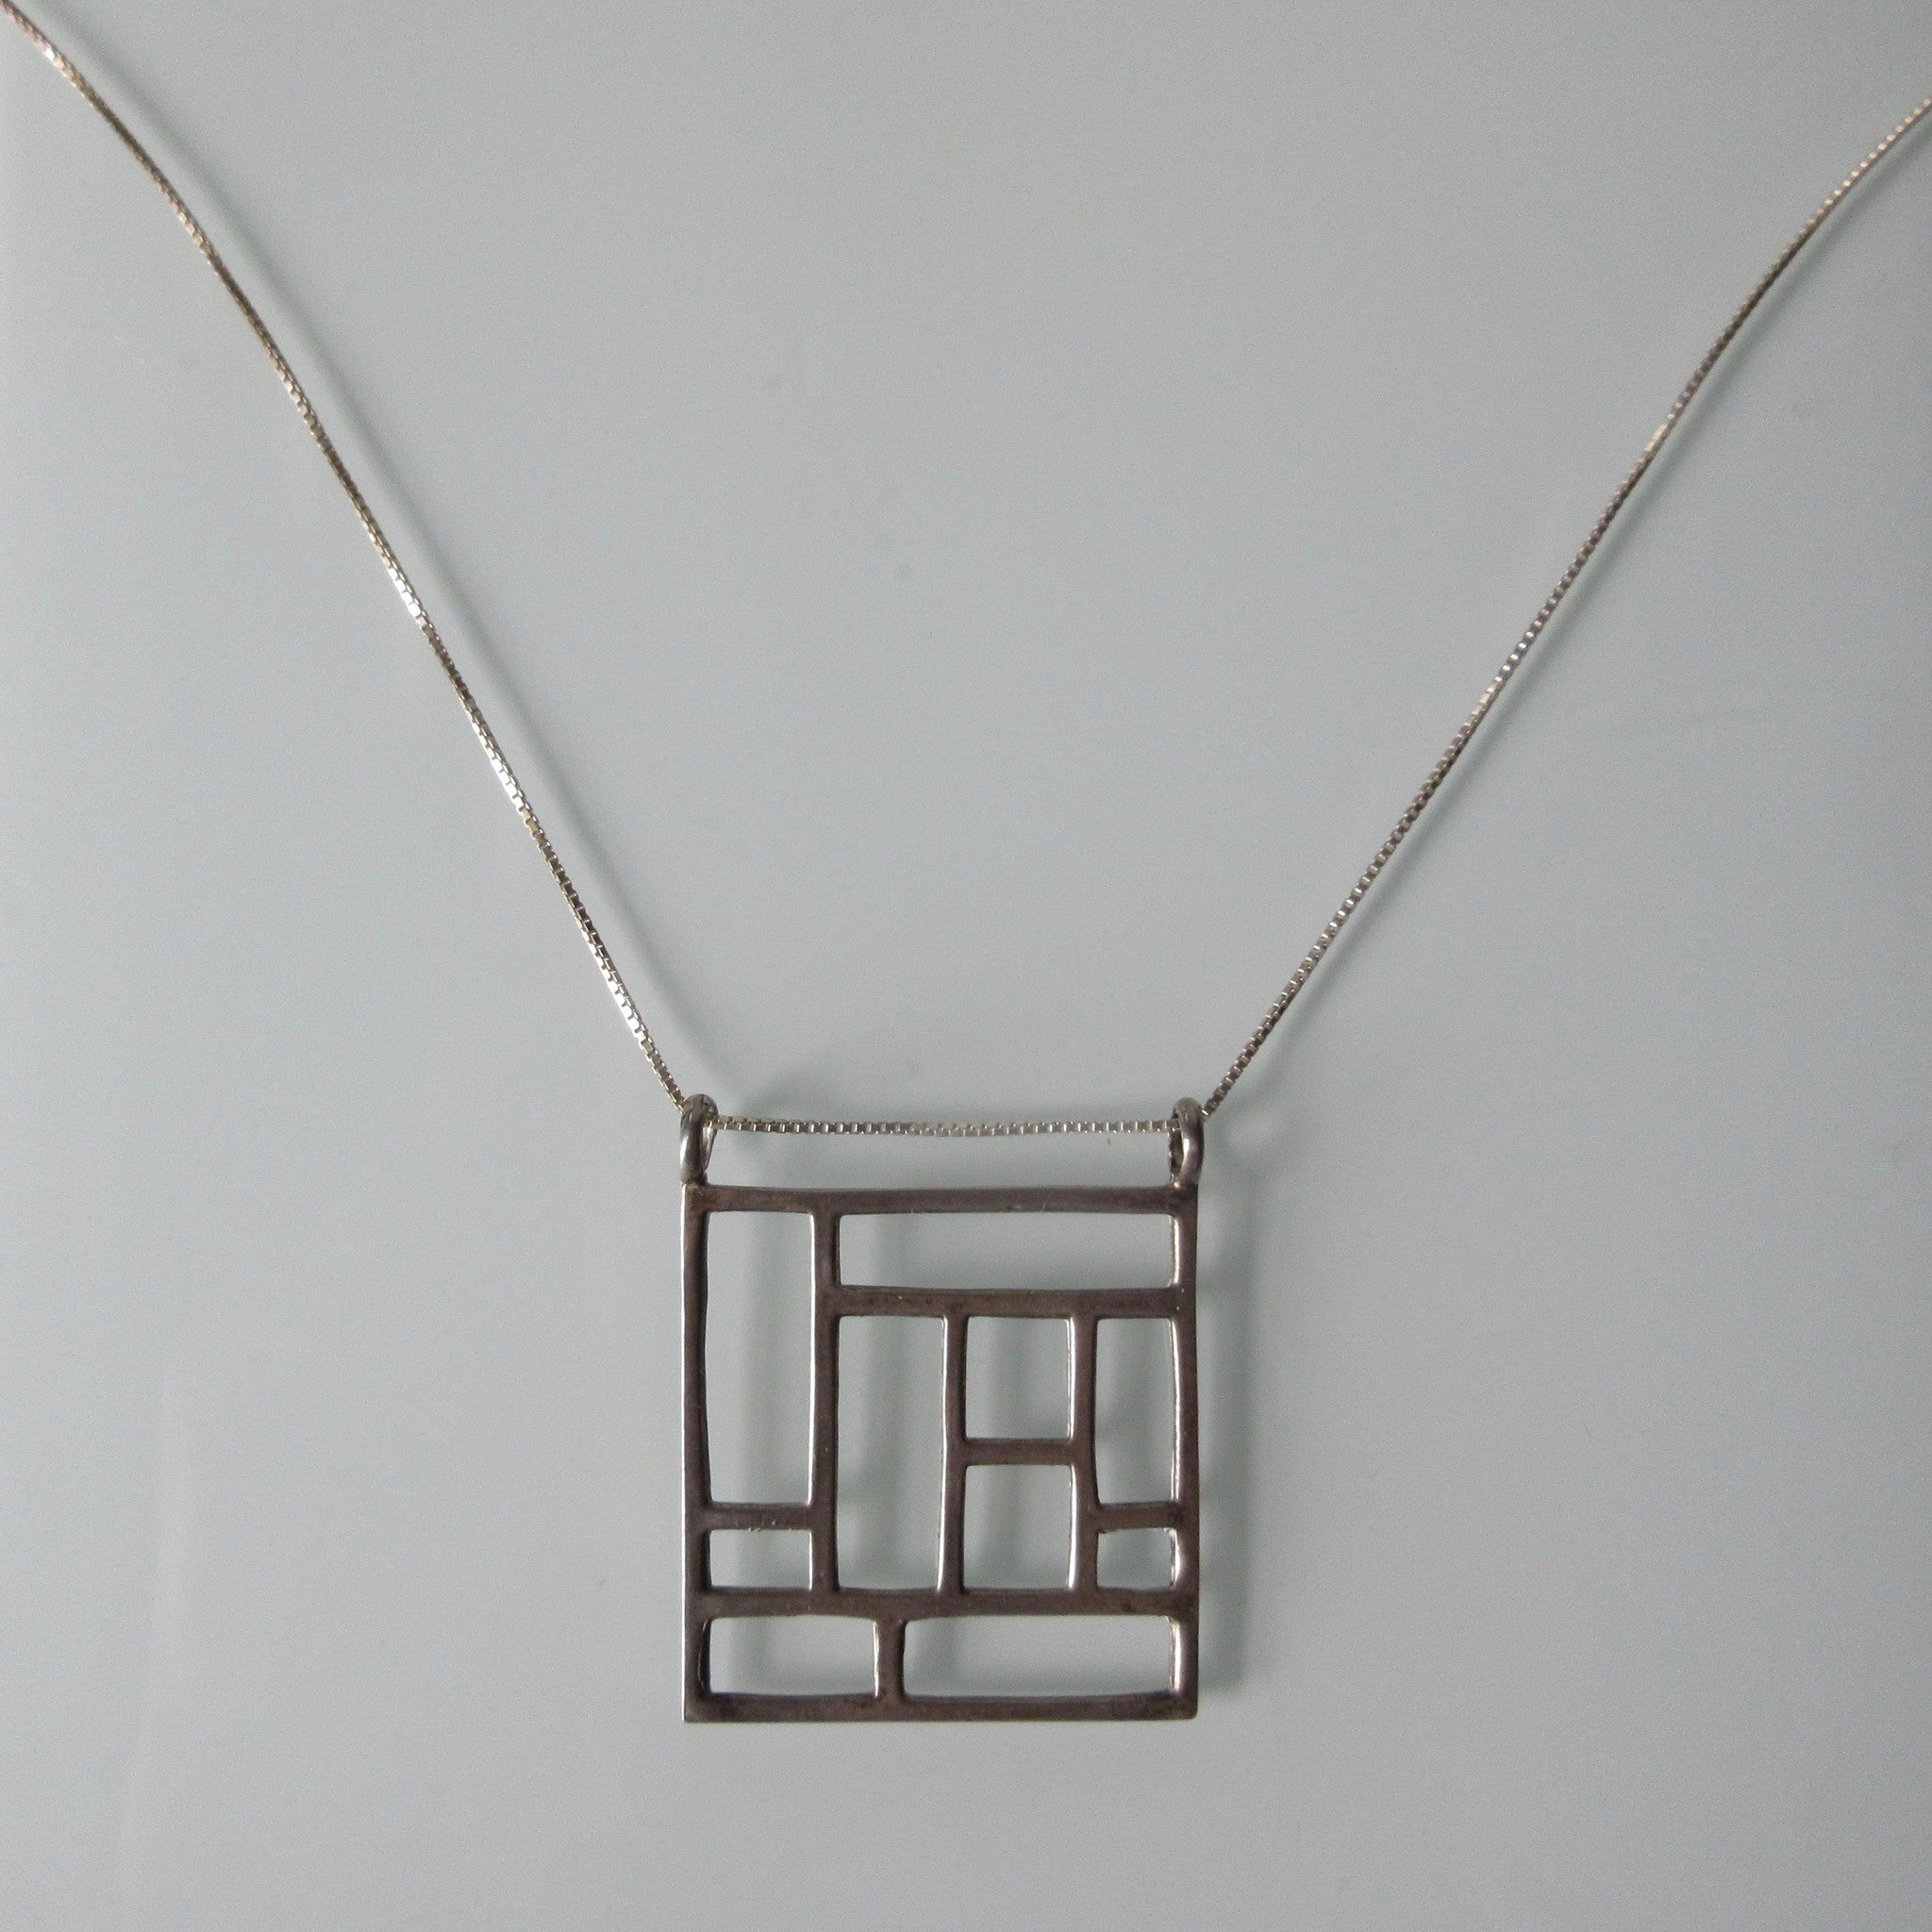 Grid Pendant on Sterling Silver Chain 20"